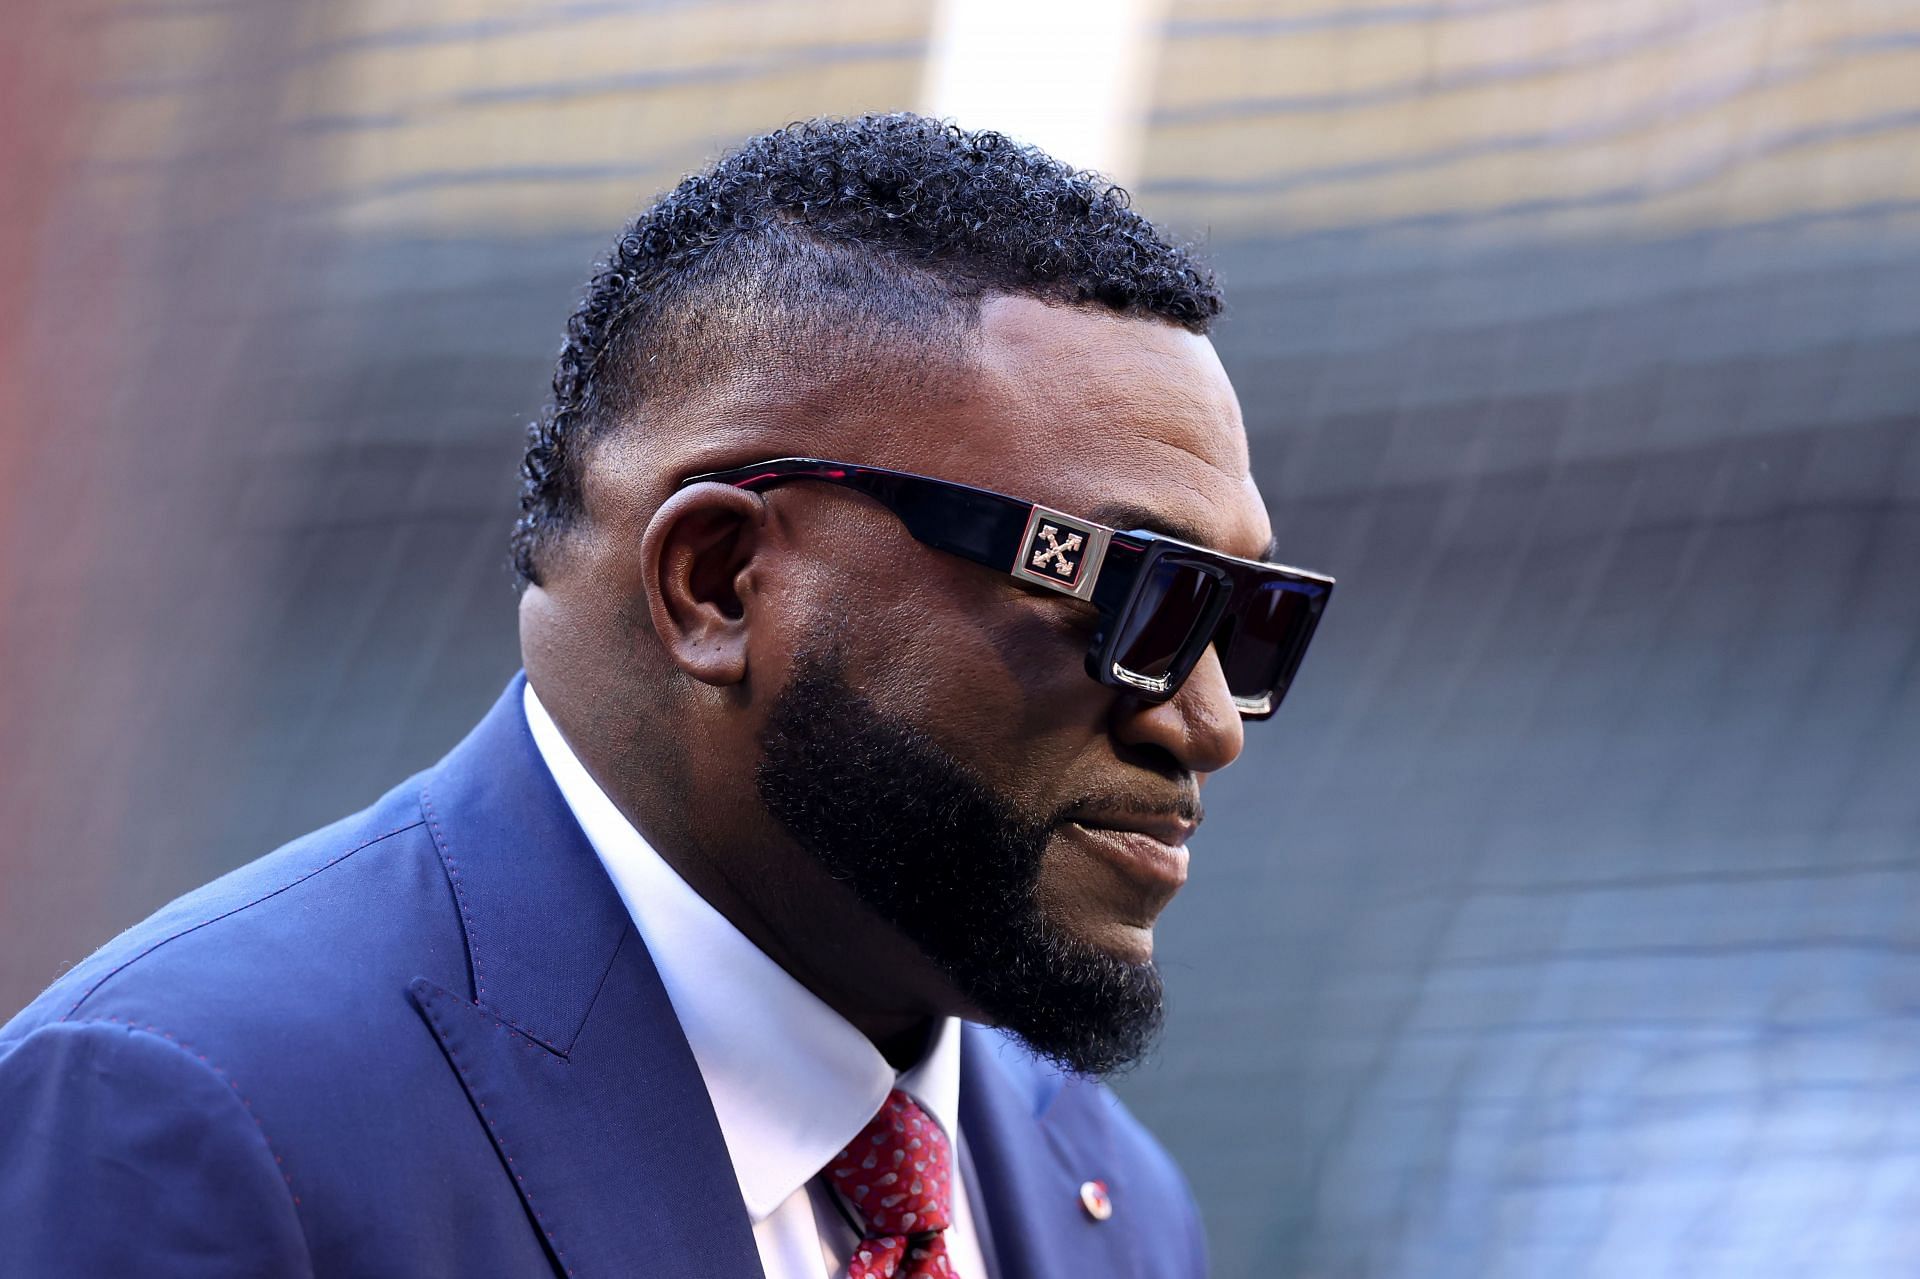 The arrest could lead to justice and more information regarding the attempt on David Ortiz&rsquo;s life.